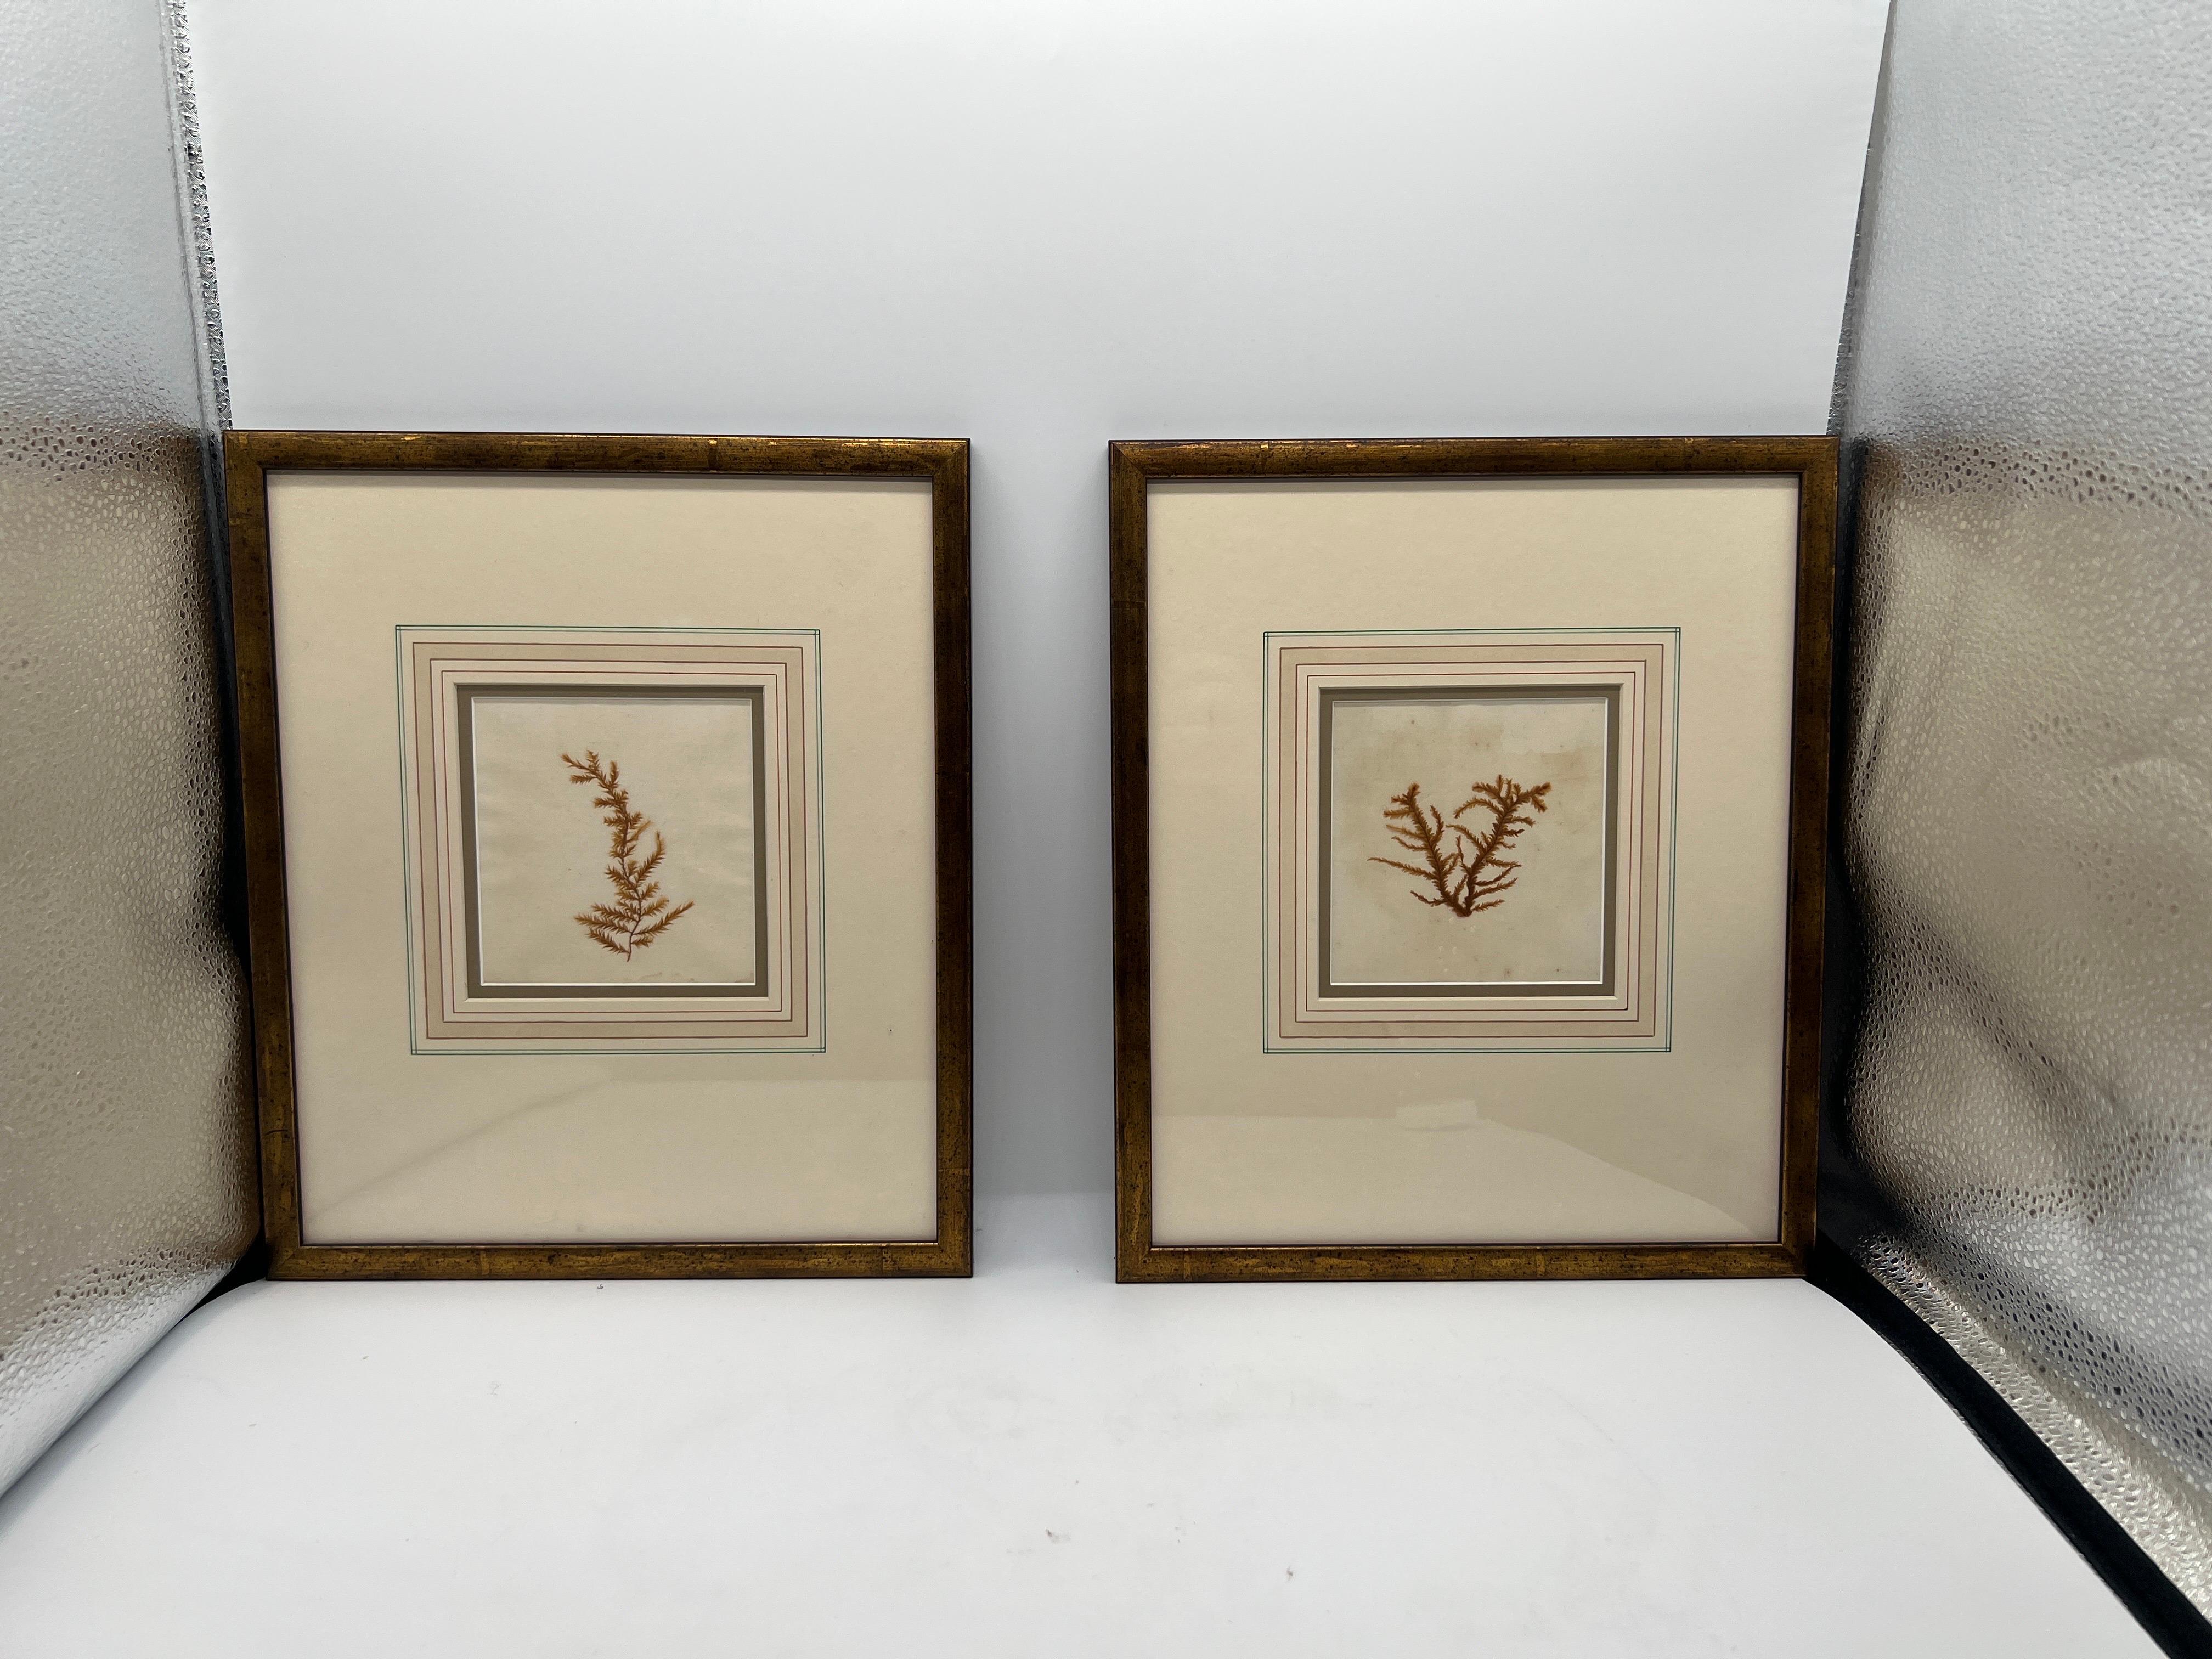 Likely American or French, early 20th century.

A grouping of four framed and well matted botanical specimens. Two of the specimens are marked for their specimen - others appear unmarked.